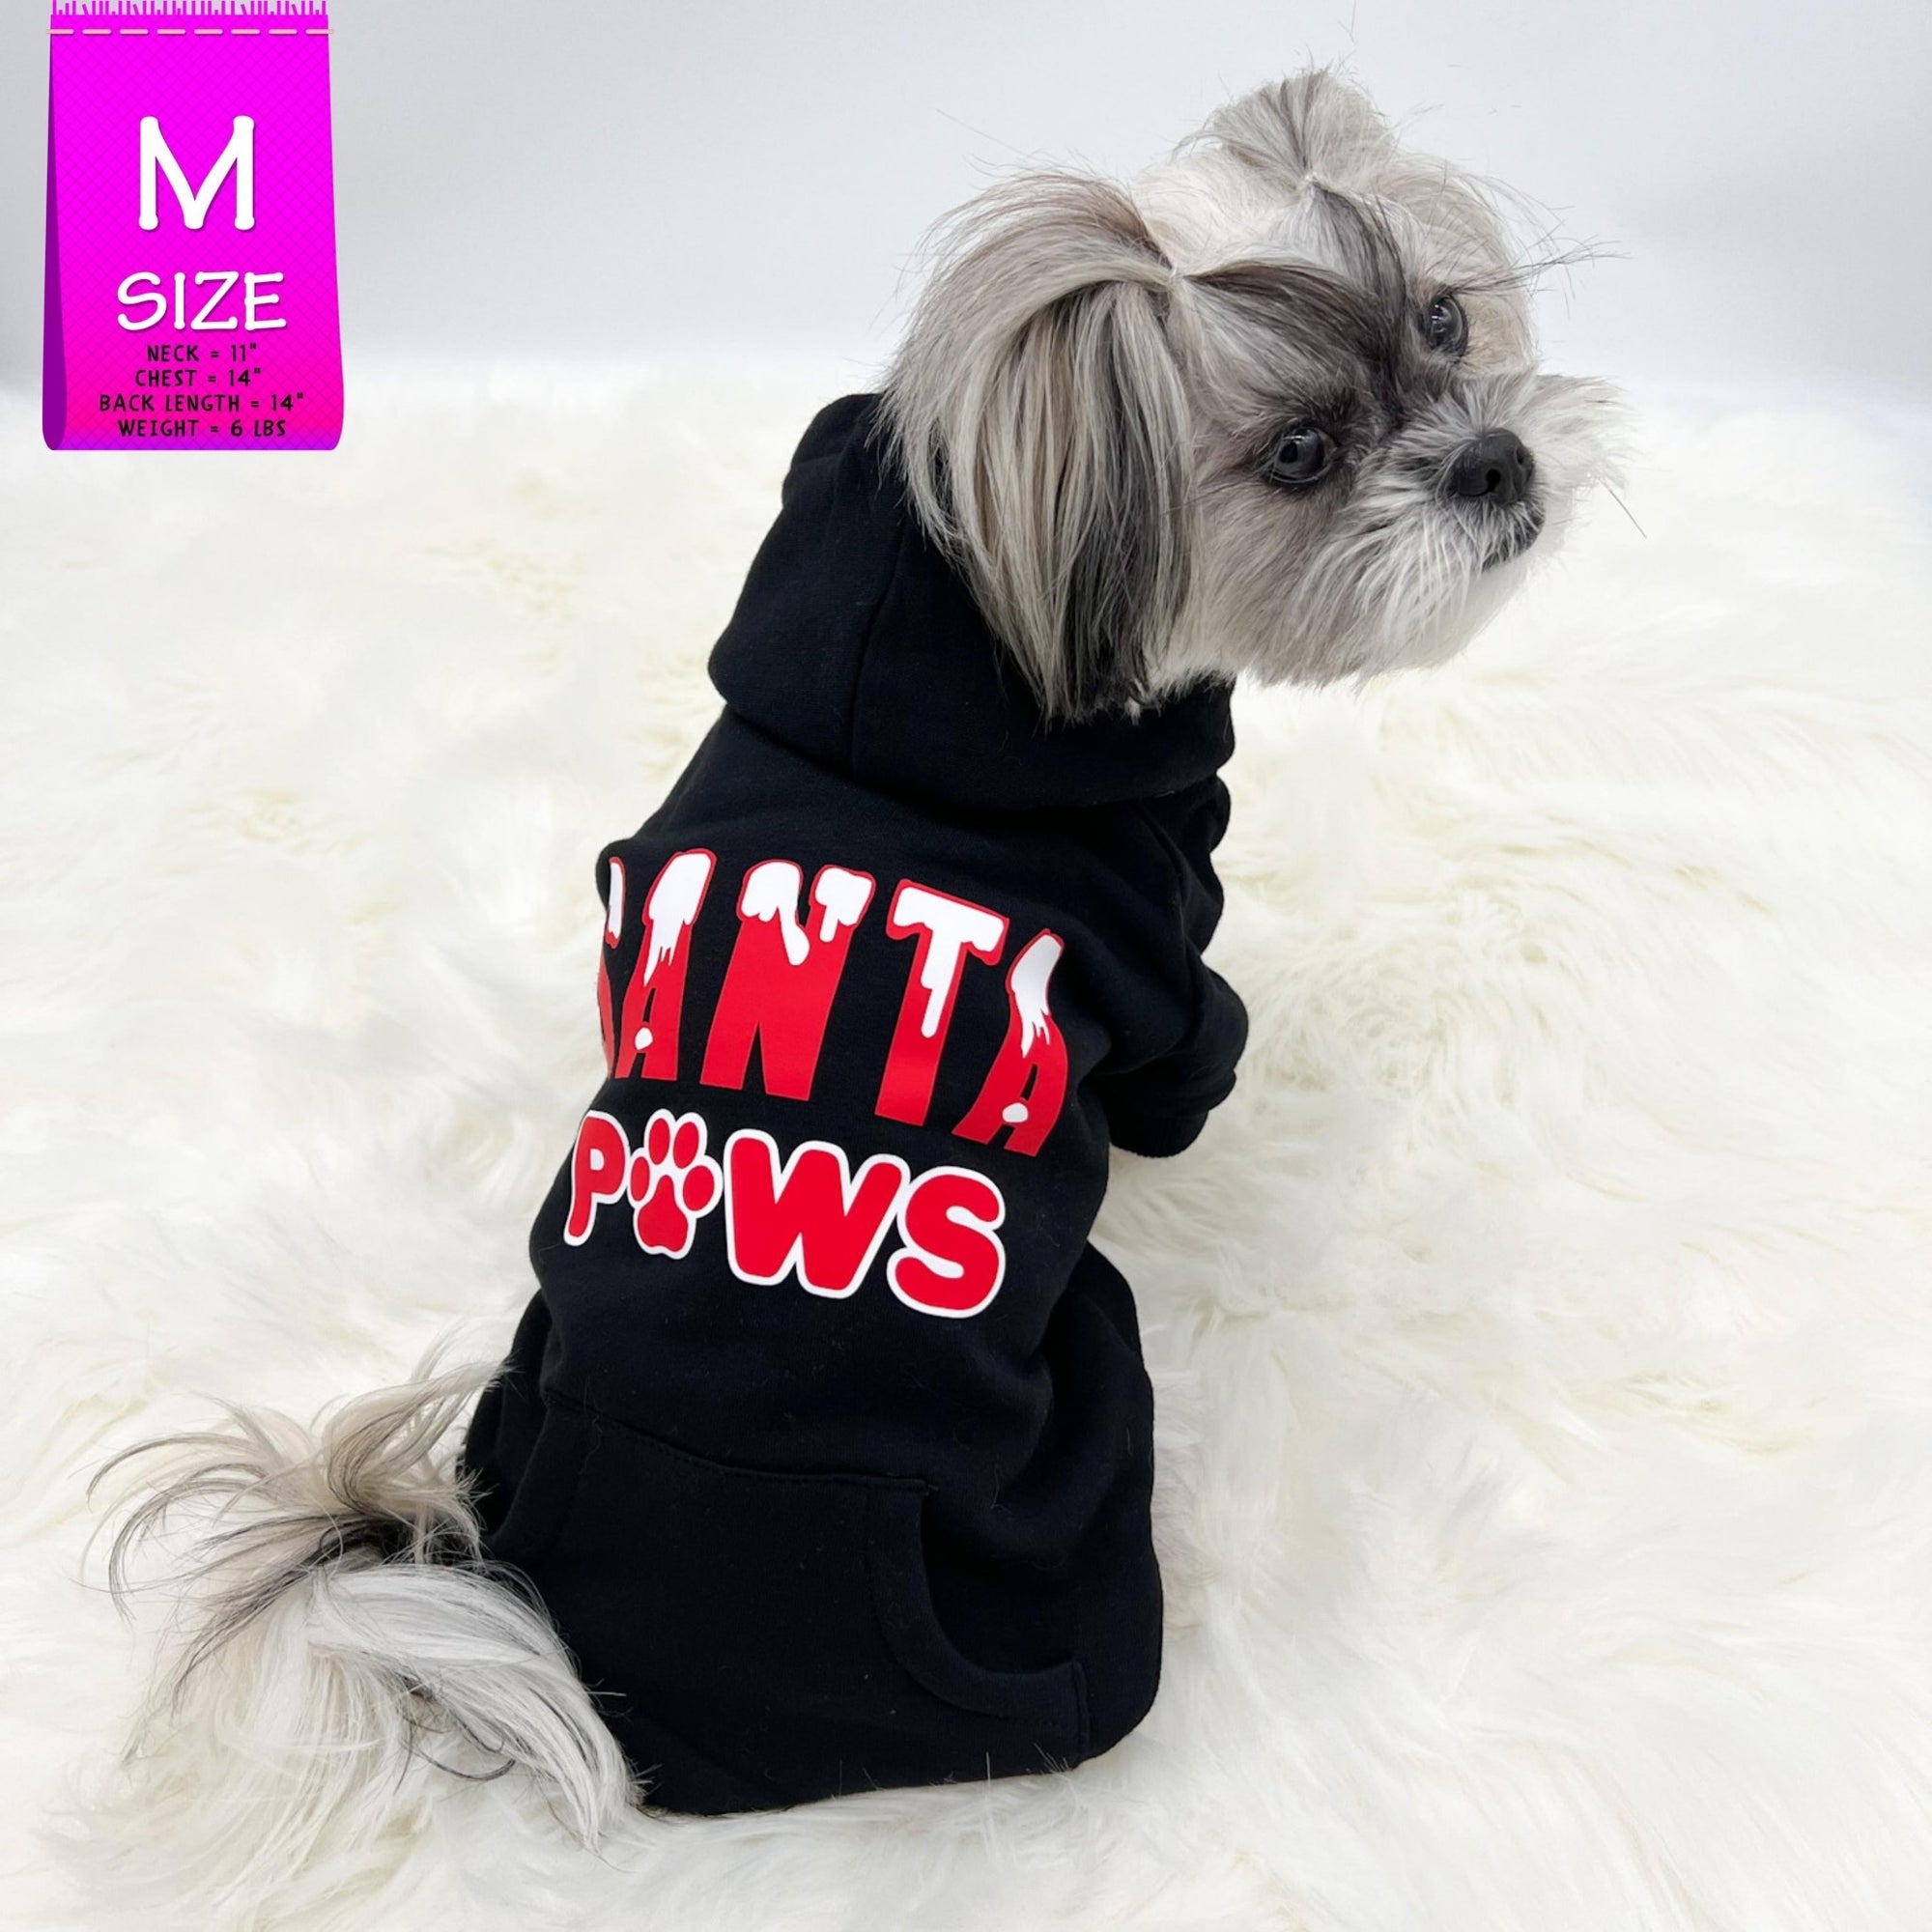 Dog Hoodie - Hoodies For Dogs - Shih Tzu wearing &quot;Santa Paws&quot; dog hoodie in black - back view is snow capped red and white SANTA letters with paws in red and white spelled with a paw - against solid white background - Wag Trendz